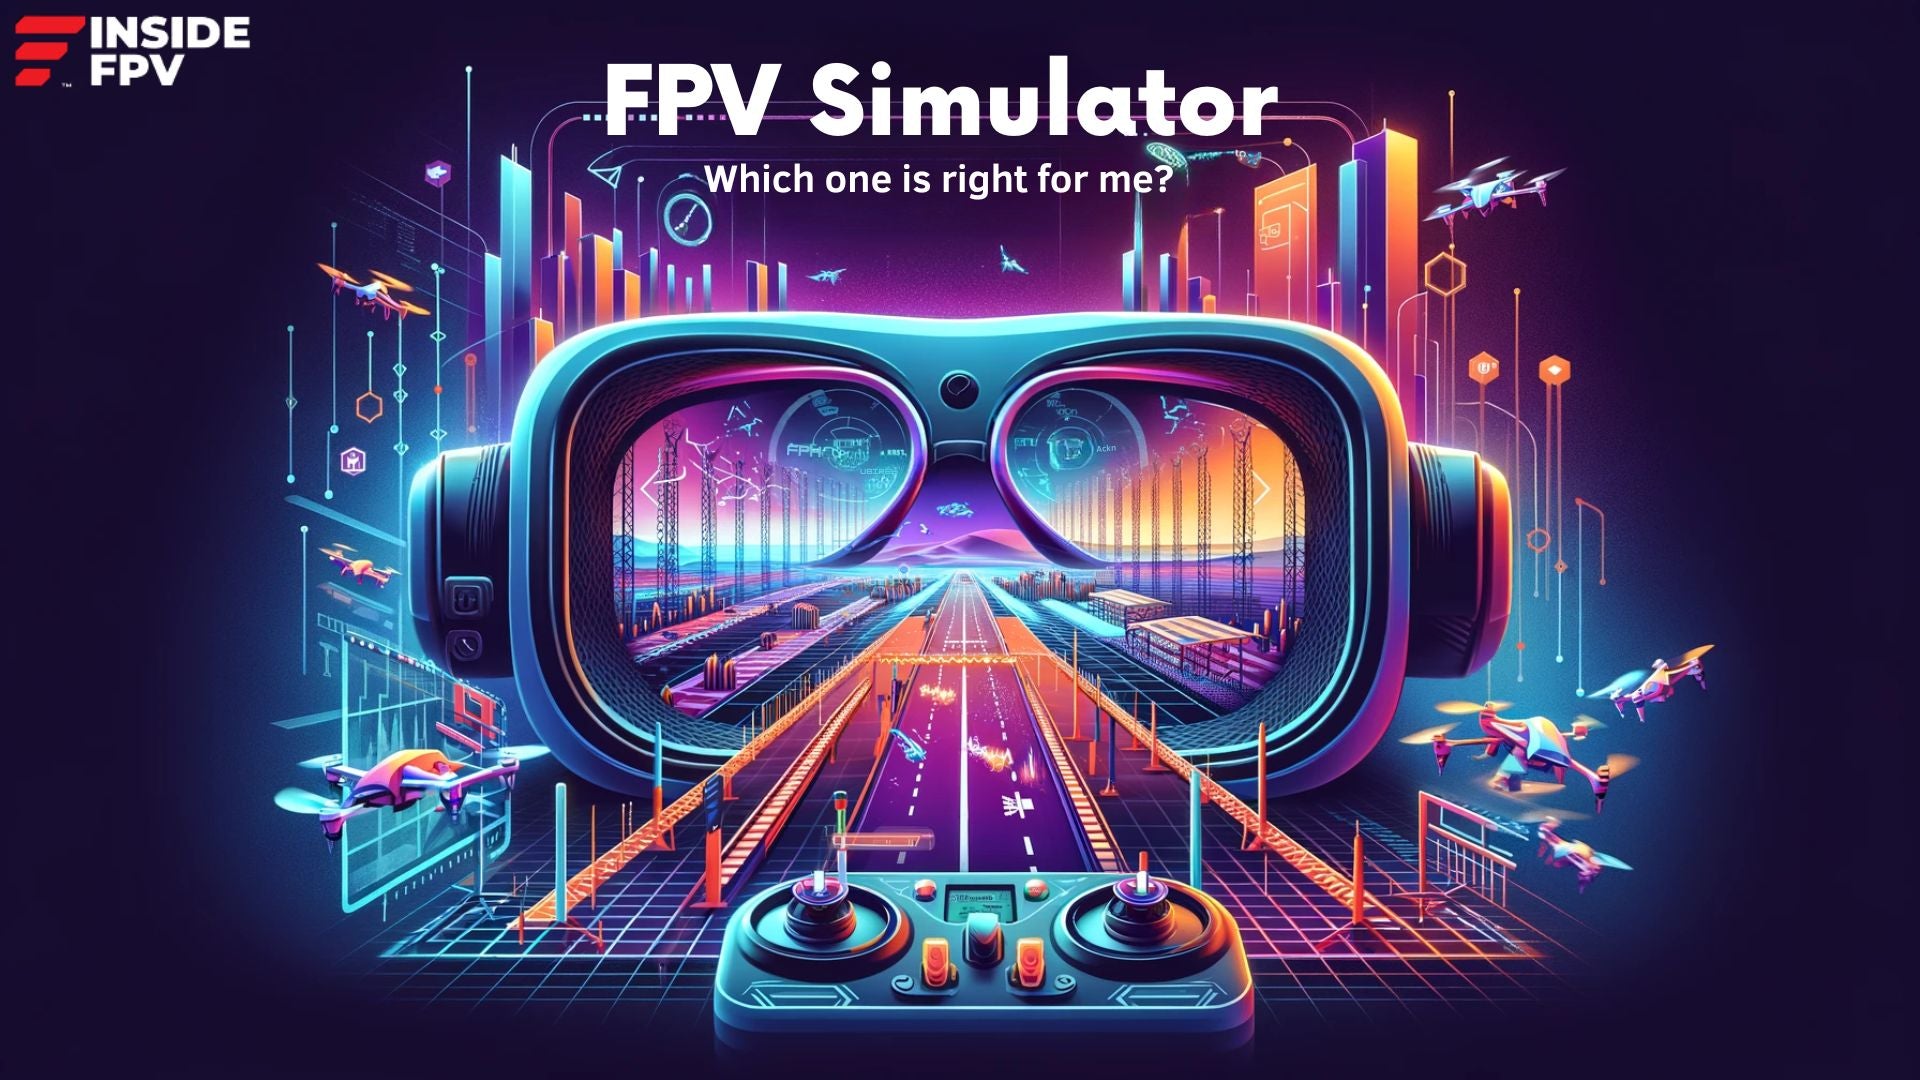 FPV Simulator – Which one is right for me?